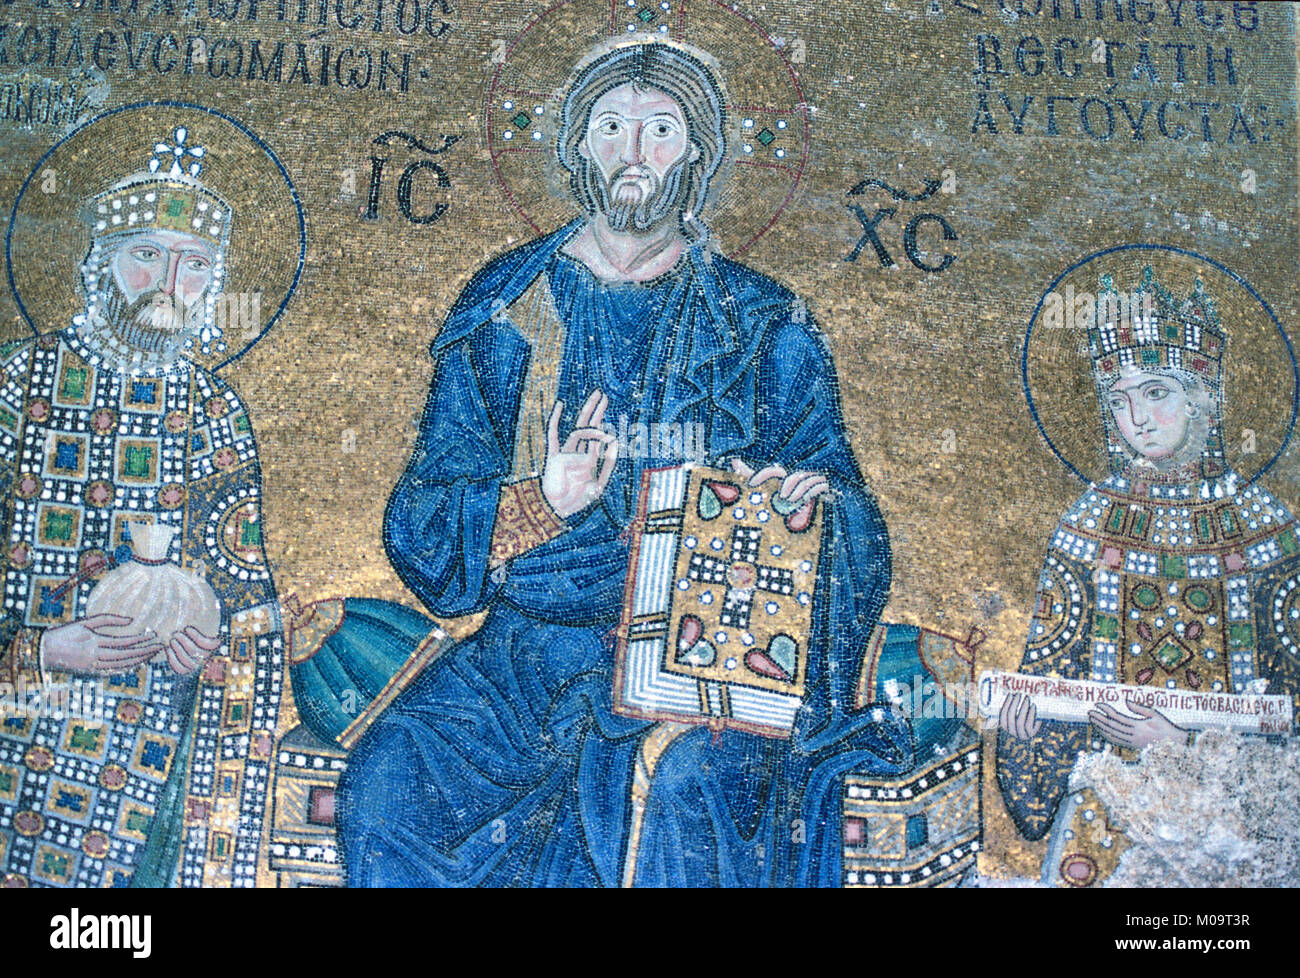 Byzantine Mosaic of Jesus Christ Holding a Bible flanked by Byzantine Emperor Constantine IX Monomachos (c1000-1055), reigned 1042-1055, Offering a Bag of Money, and Byzantine Empress Zoe Porphyrogenita in Hagia Sophia Church Museum, Sultanahmet, Istanbul, Turkey Stock Photo